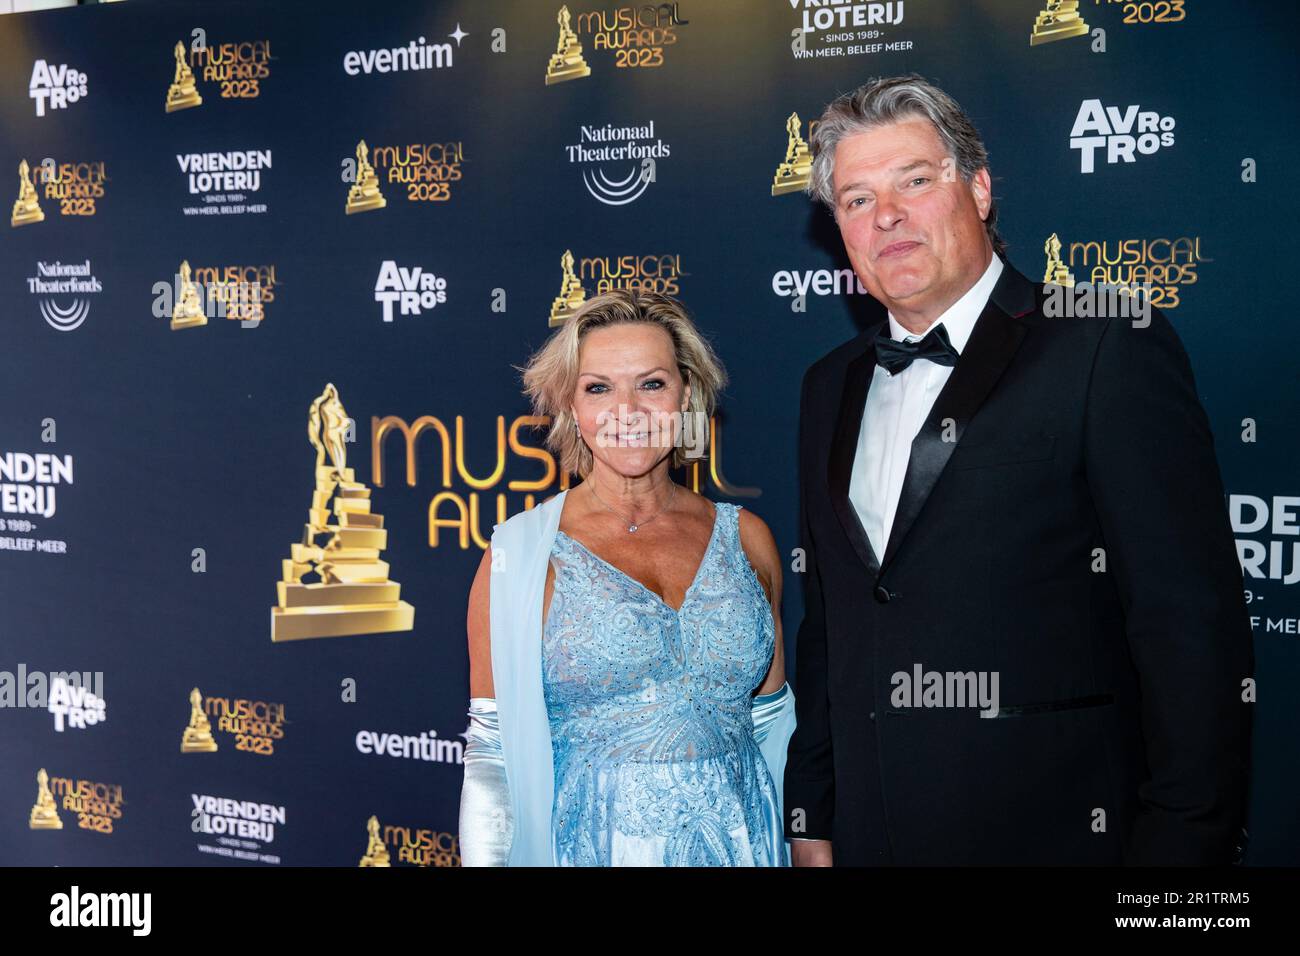 SCHEVENINGEN - Mariska van der Kolk on the red carpet, prior to the Musical  Awards Gala in the AFAS Circustheater. Prizes will be awarded in various  categories during the gala. There is